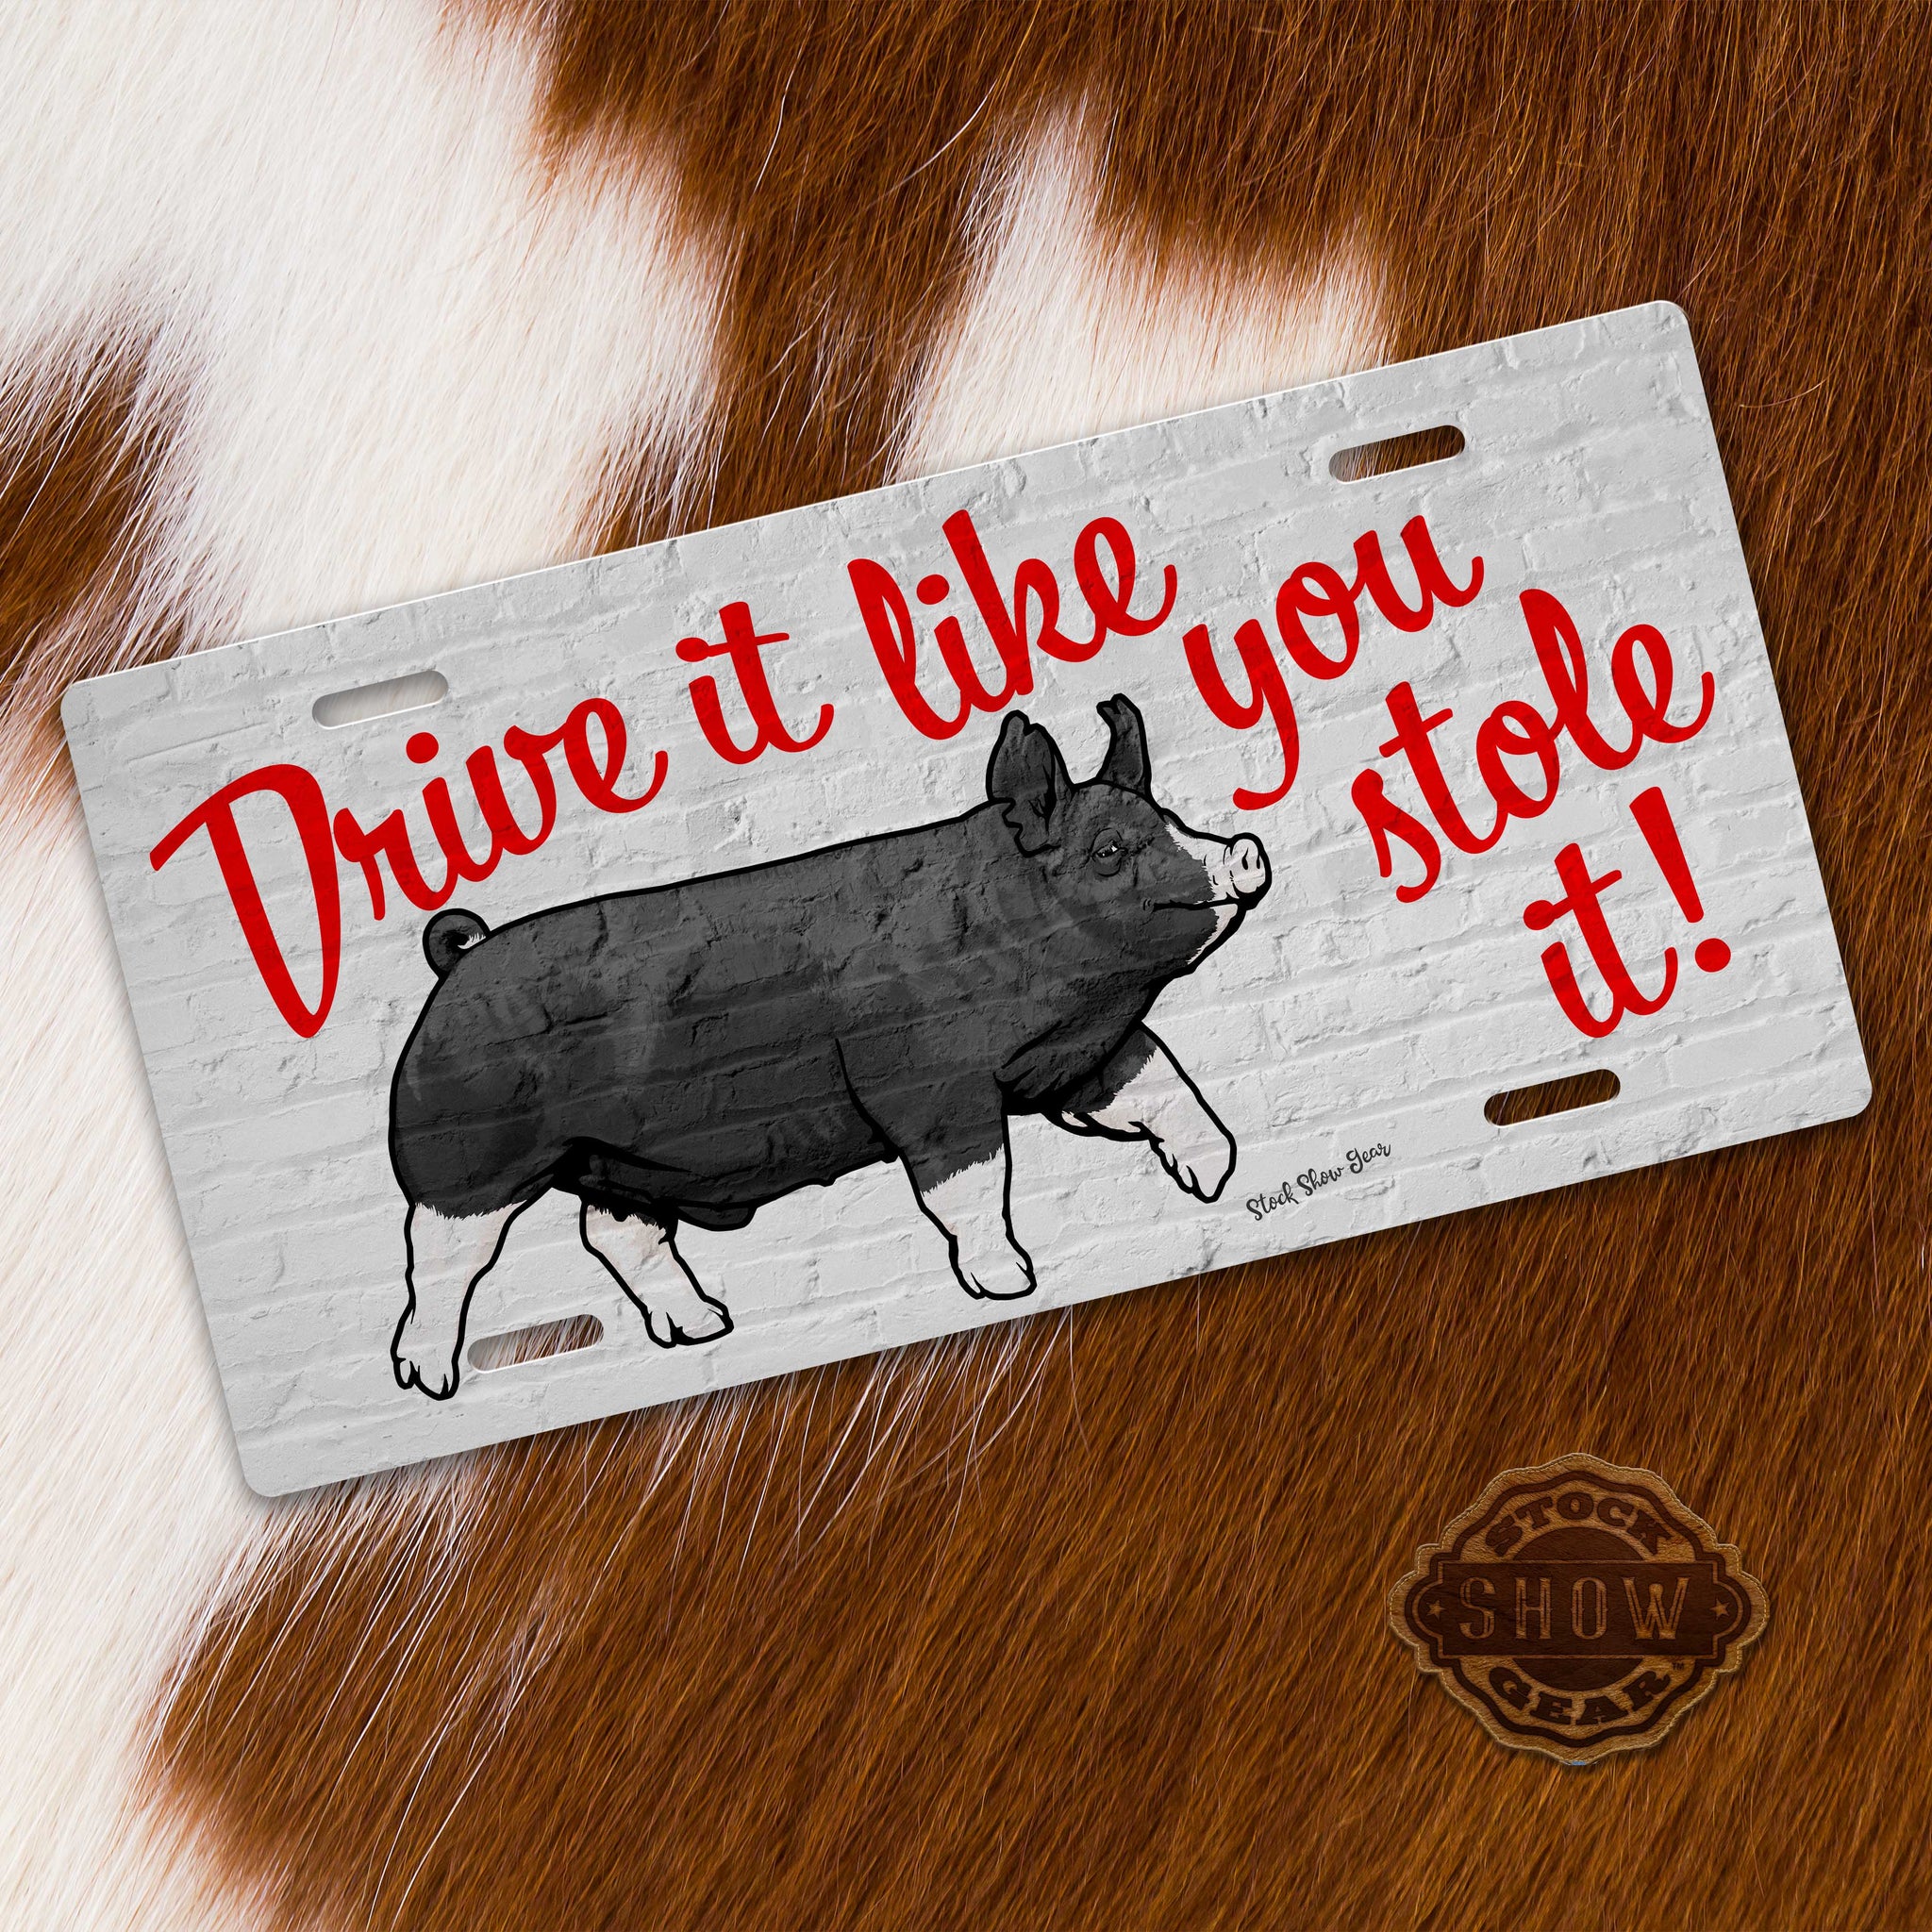 Berkshire Pig-"Drive It Like You Stole It" License Plate